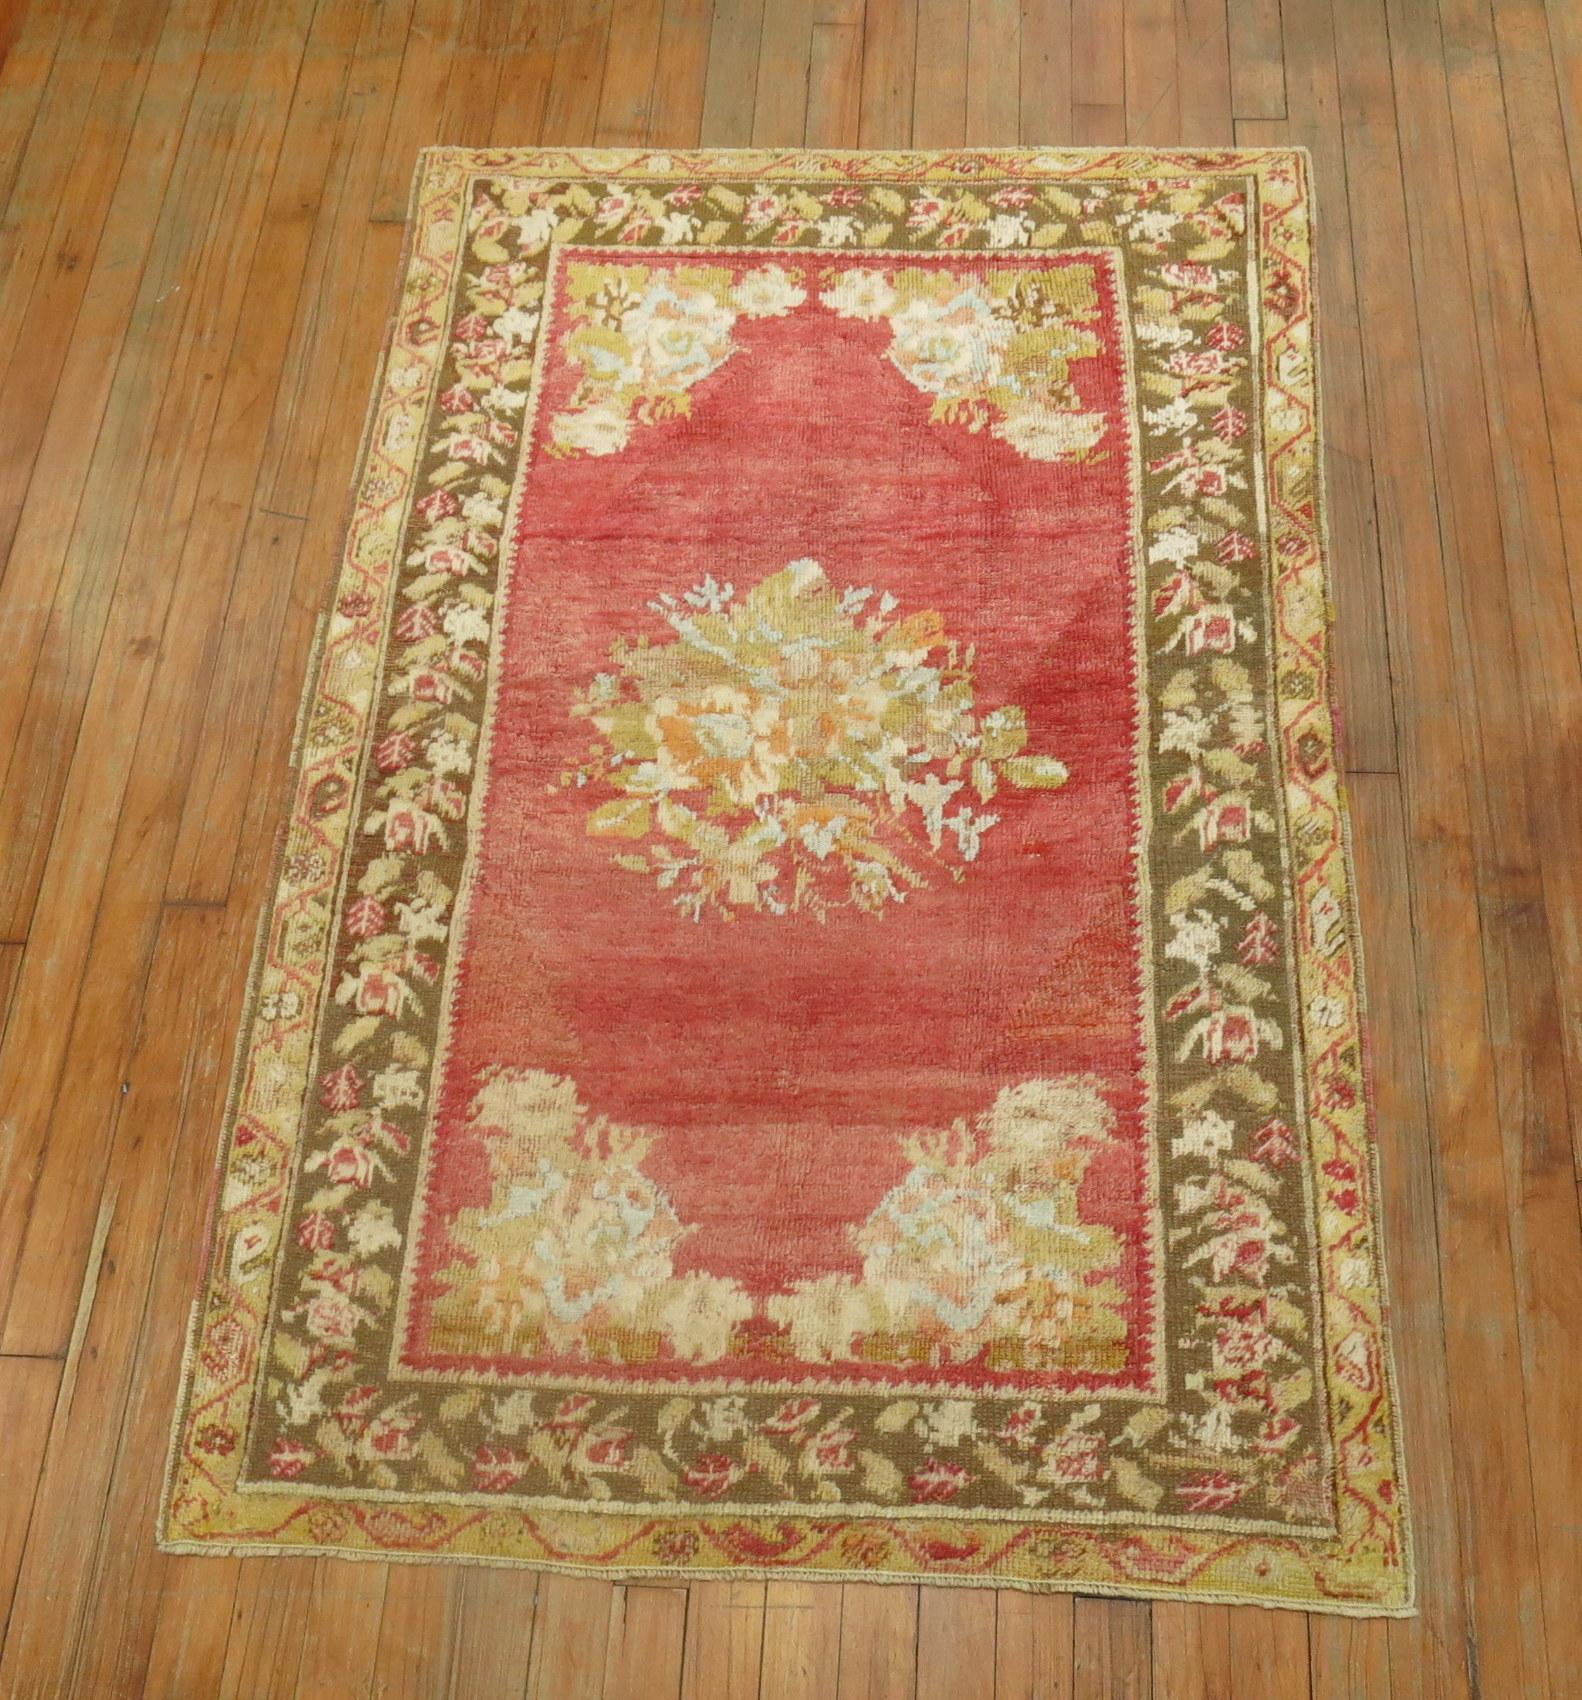 Gorgeous soft colored antique Turkish ghiordes rug with a floral open medallion design and floral border.